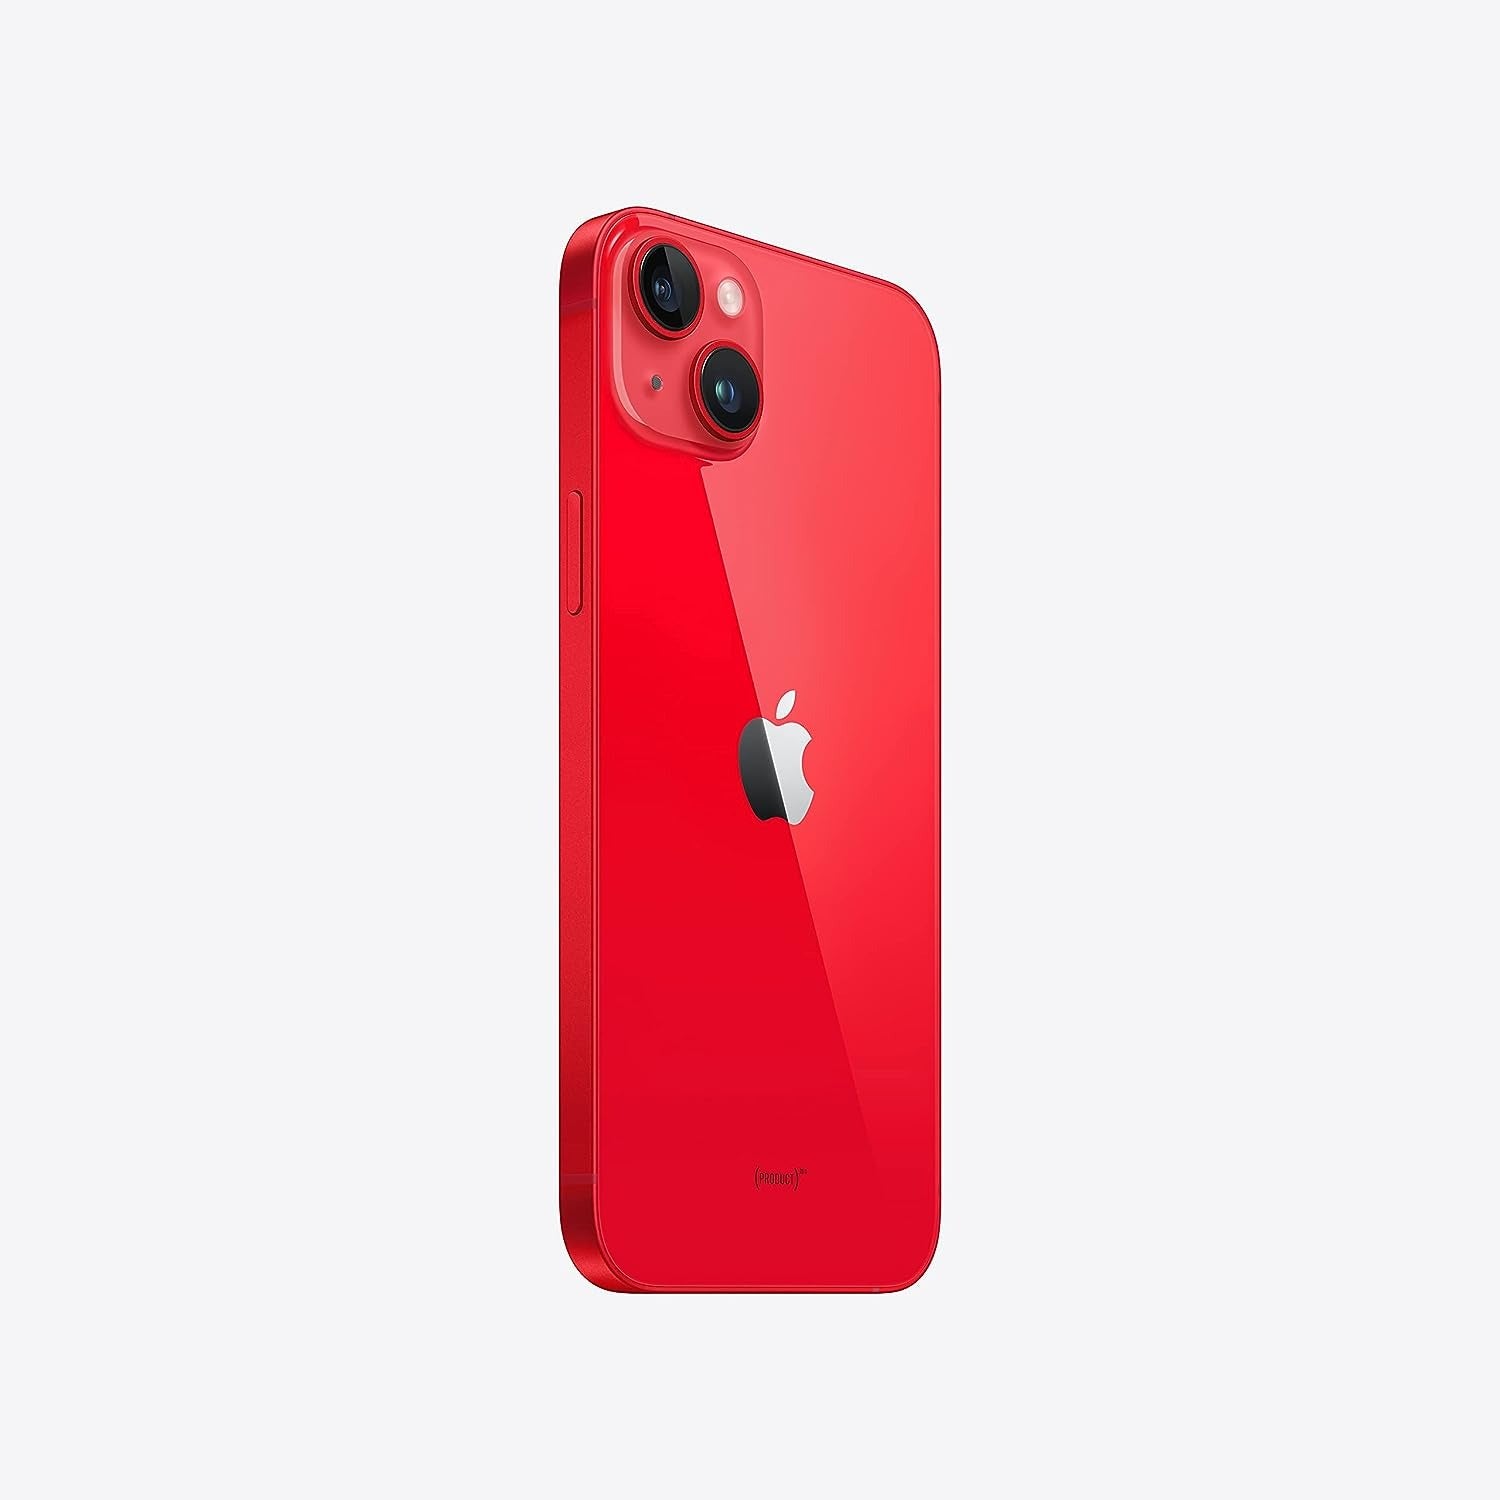 Apple iPhone 14 128GB (Unlocked) - (PRODUCT)RED (Refurbished)